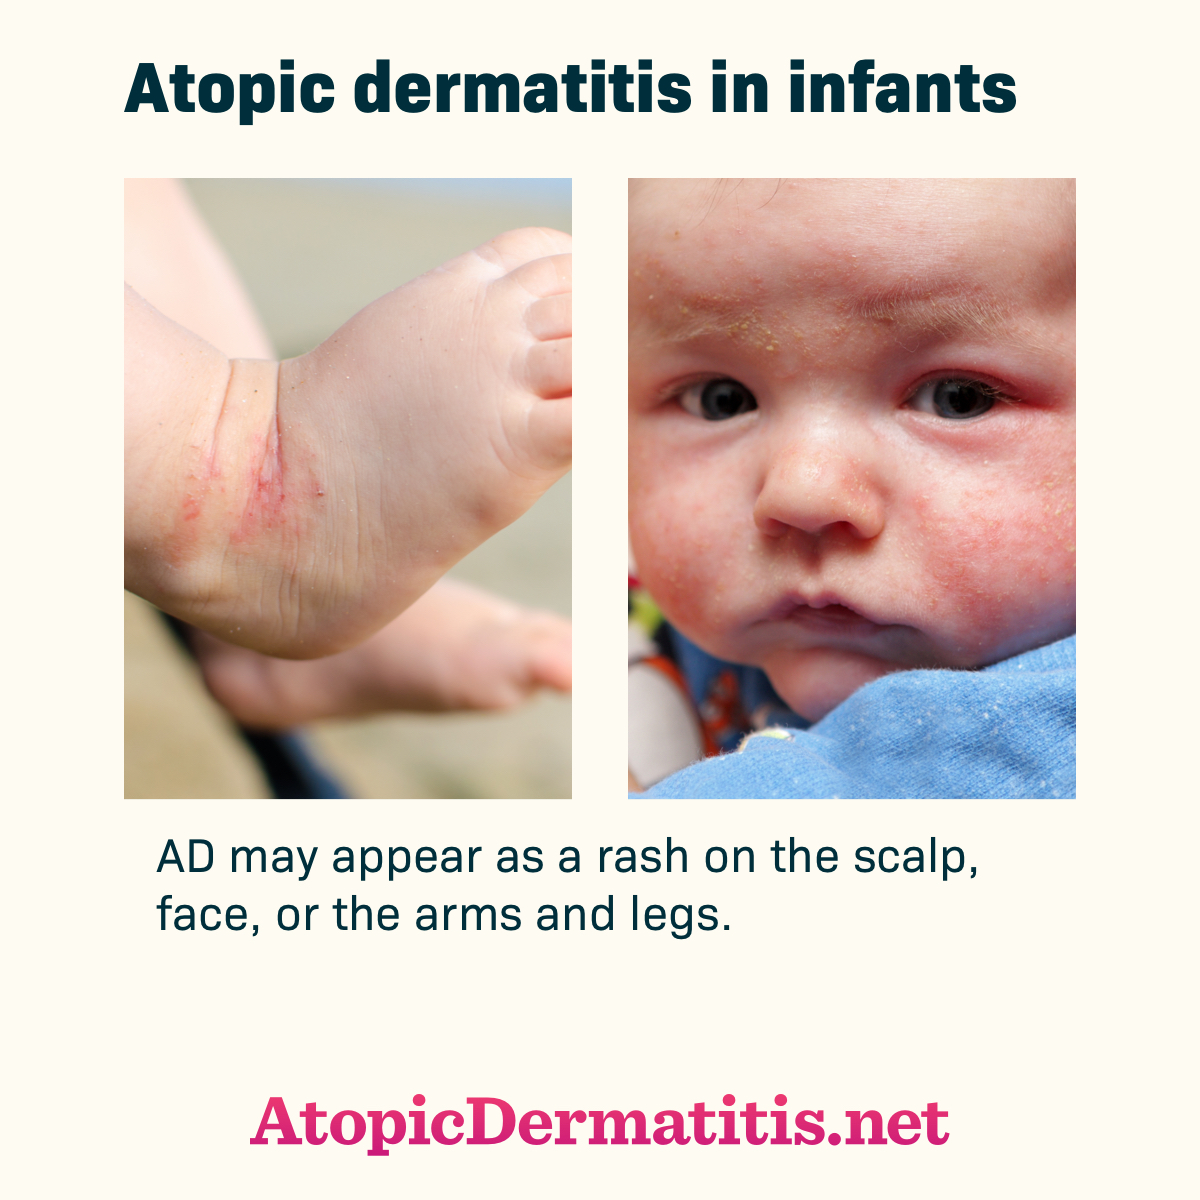 Infant with atopic dermatitis rash on foot and face